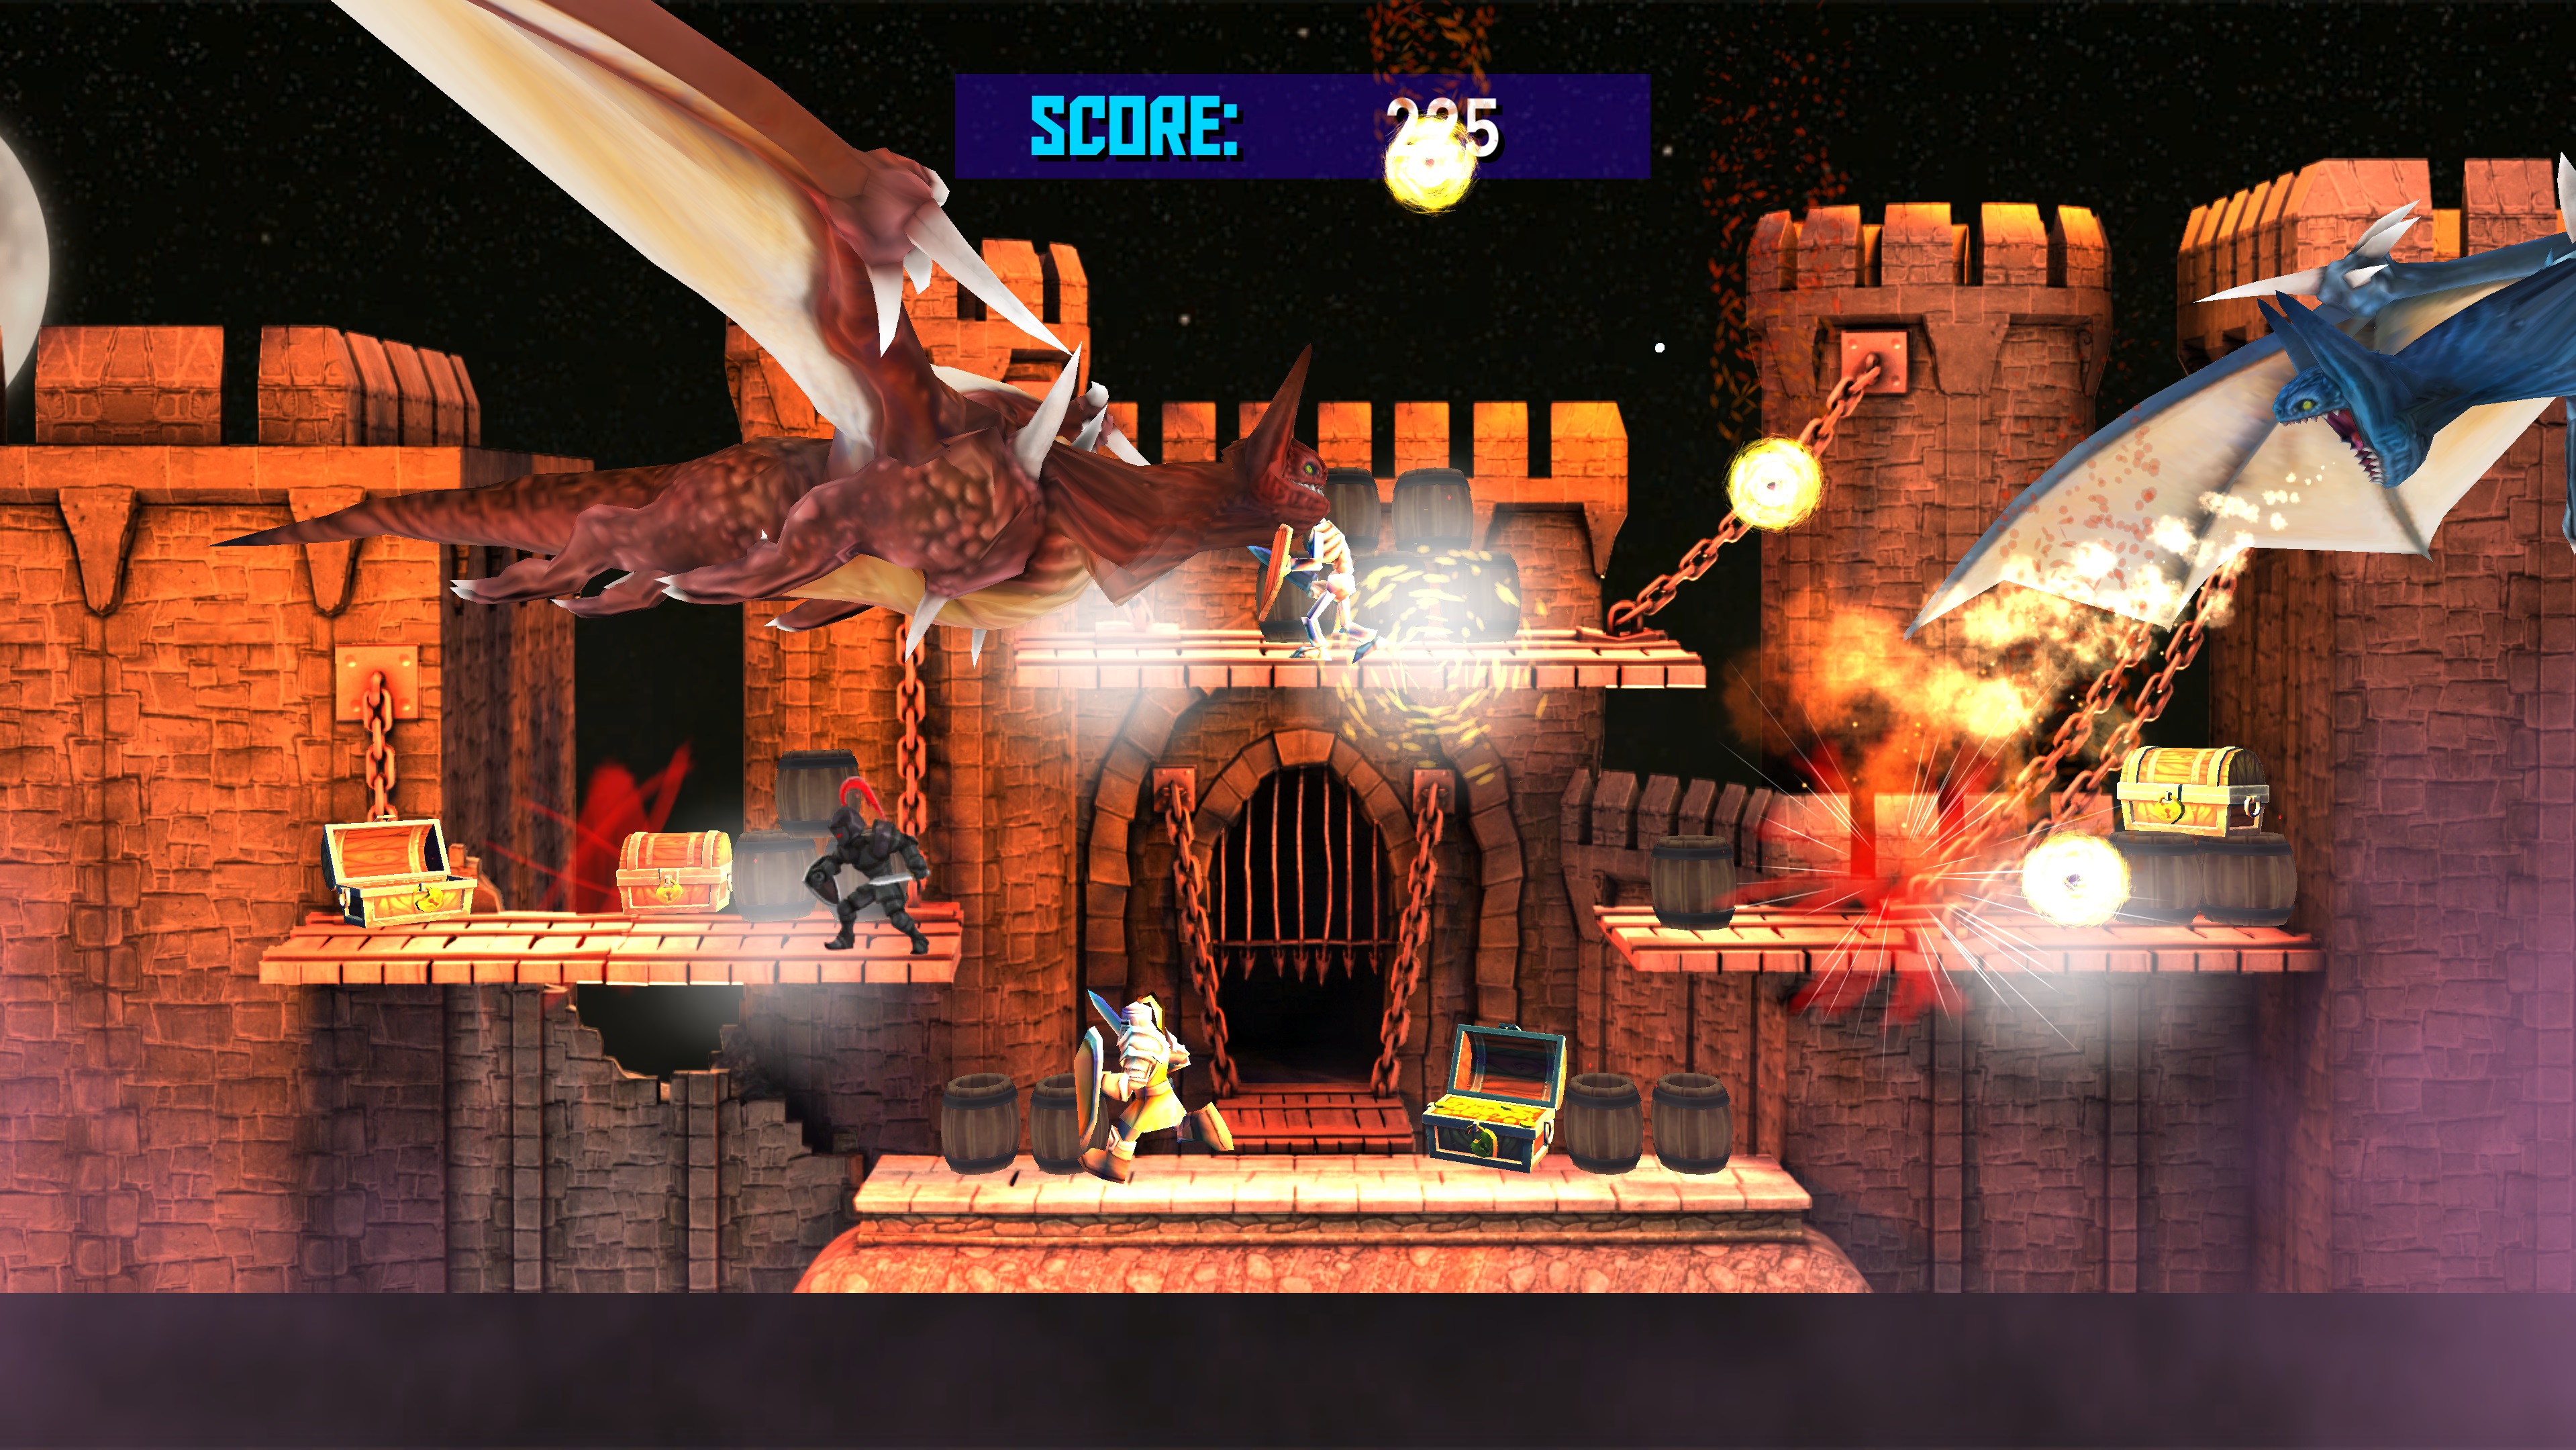 Escape From The Dragons screenshot